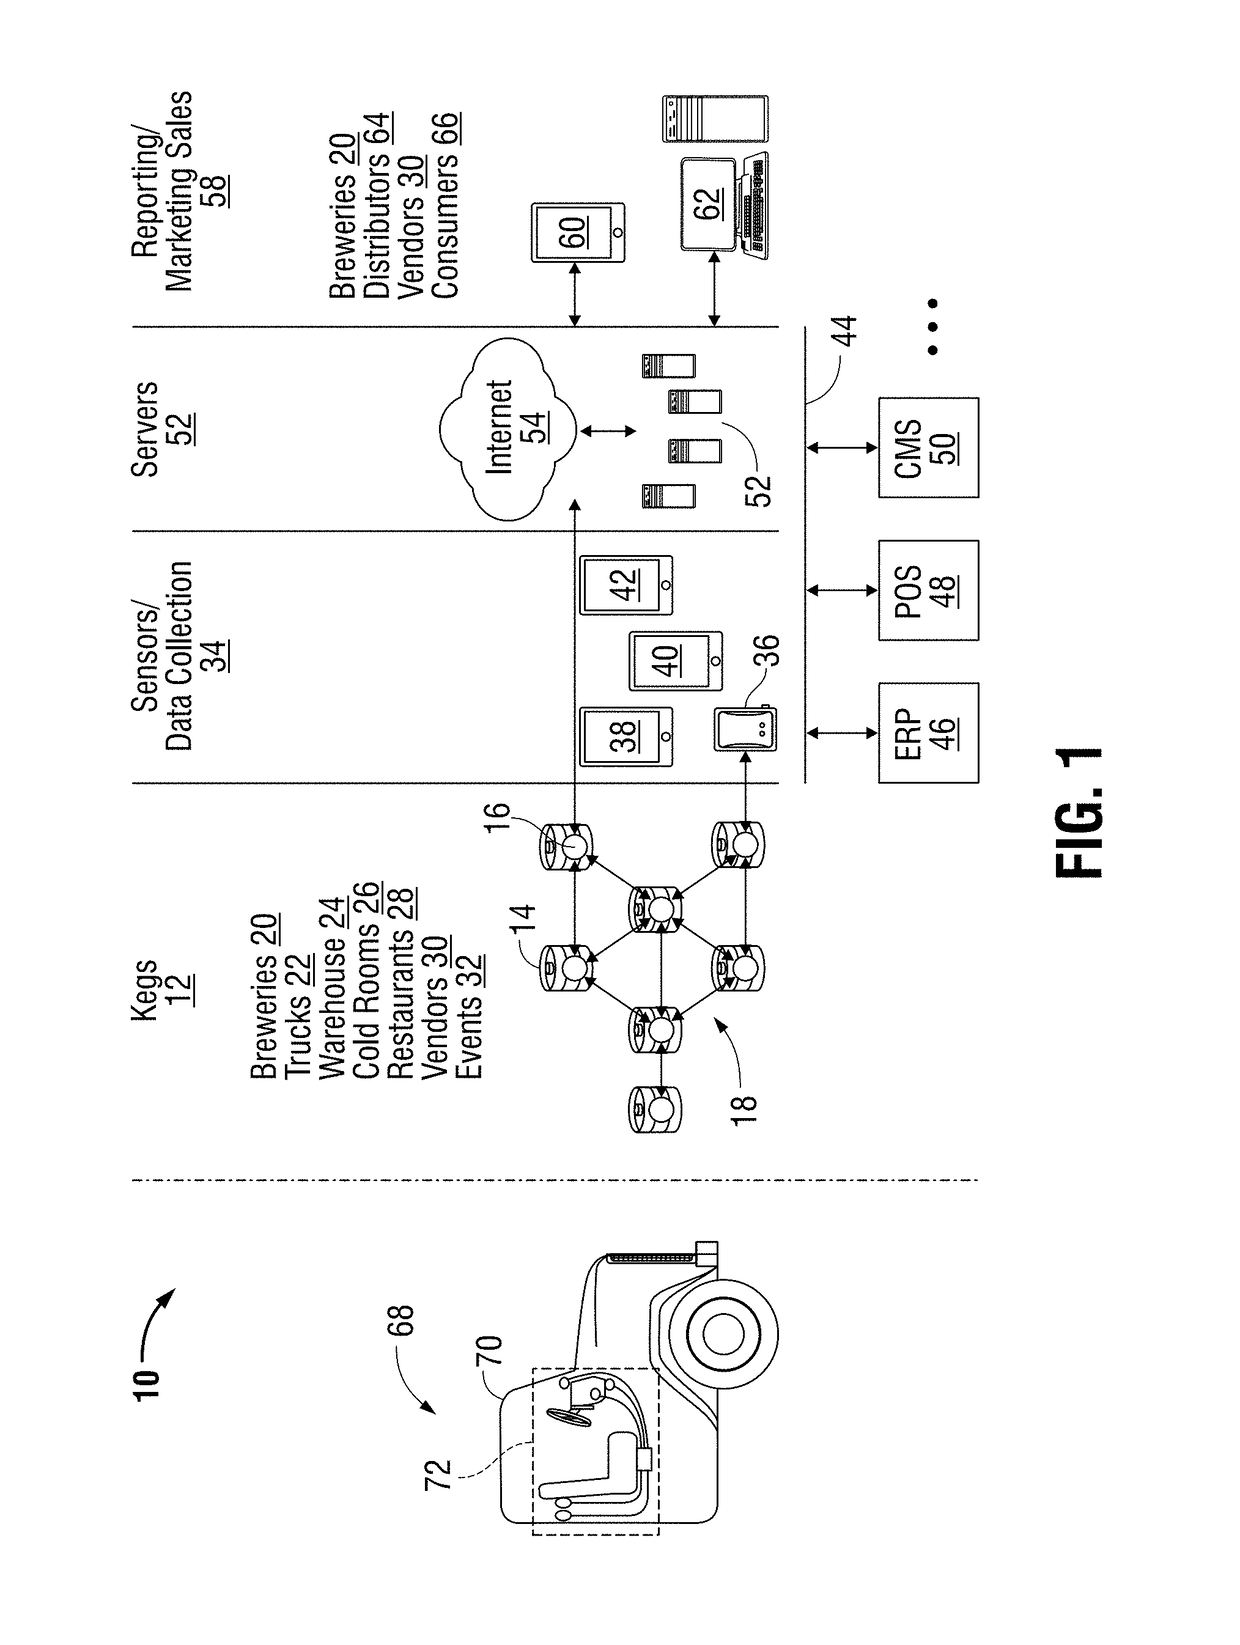 Method and system for monitoring, controlling and optimizing flow of products delivered to customers via containers that flow in a distribution network